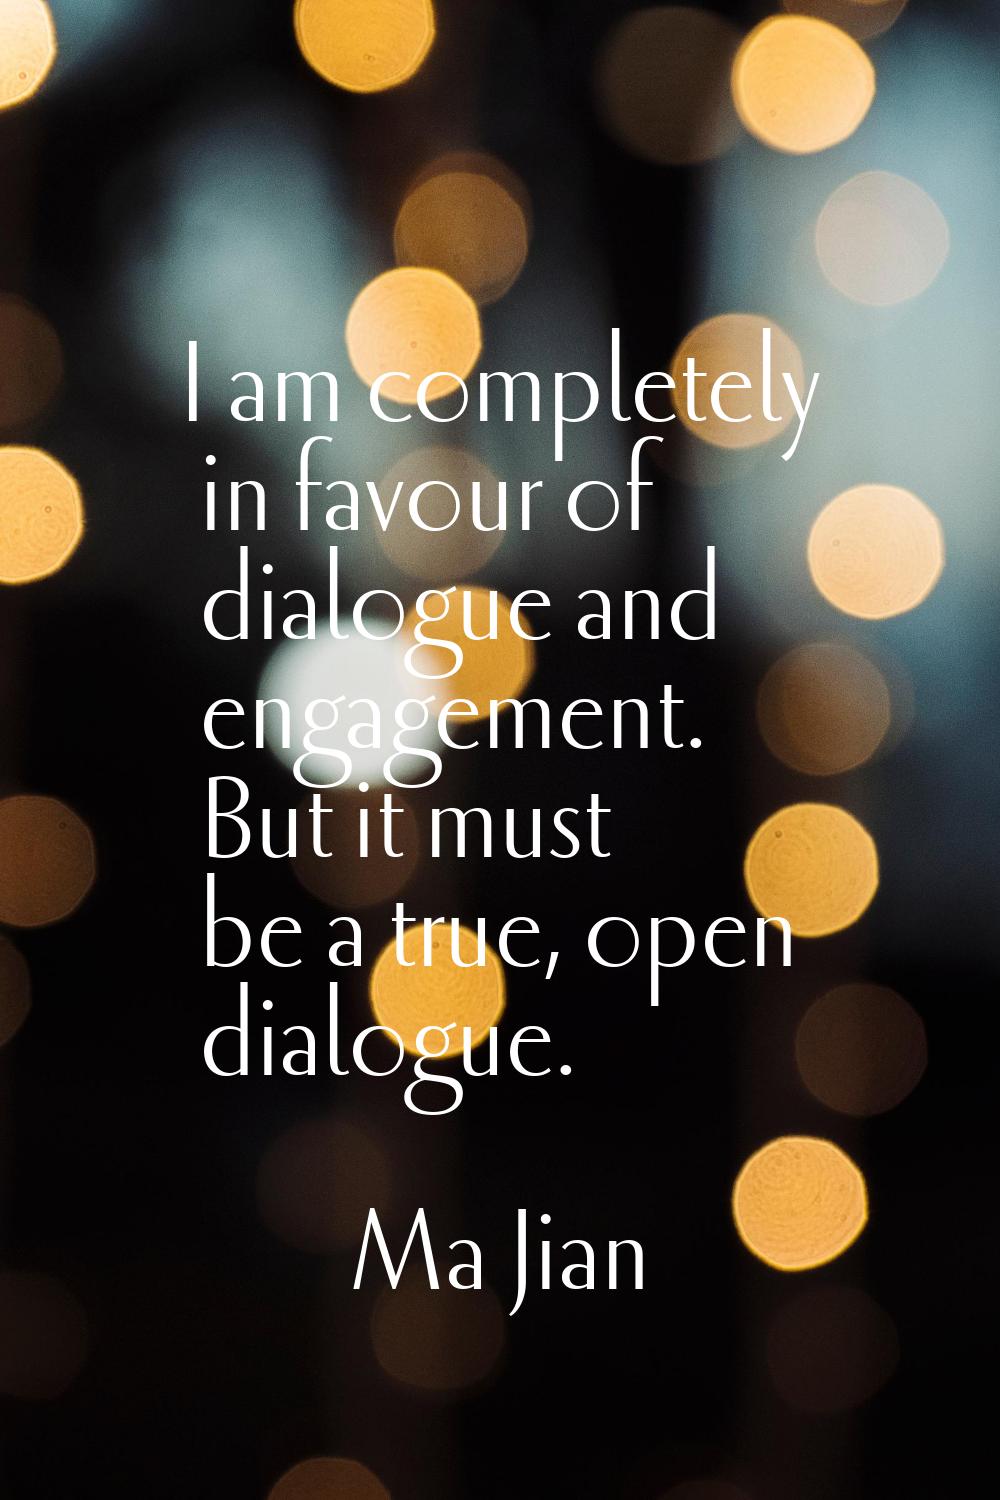 I am completely in favour of dialogue and engagement. But it must be a true, open dialogue.